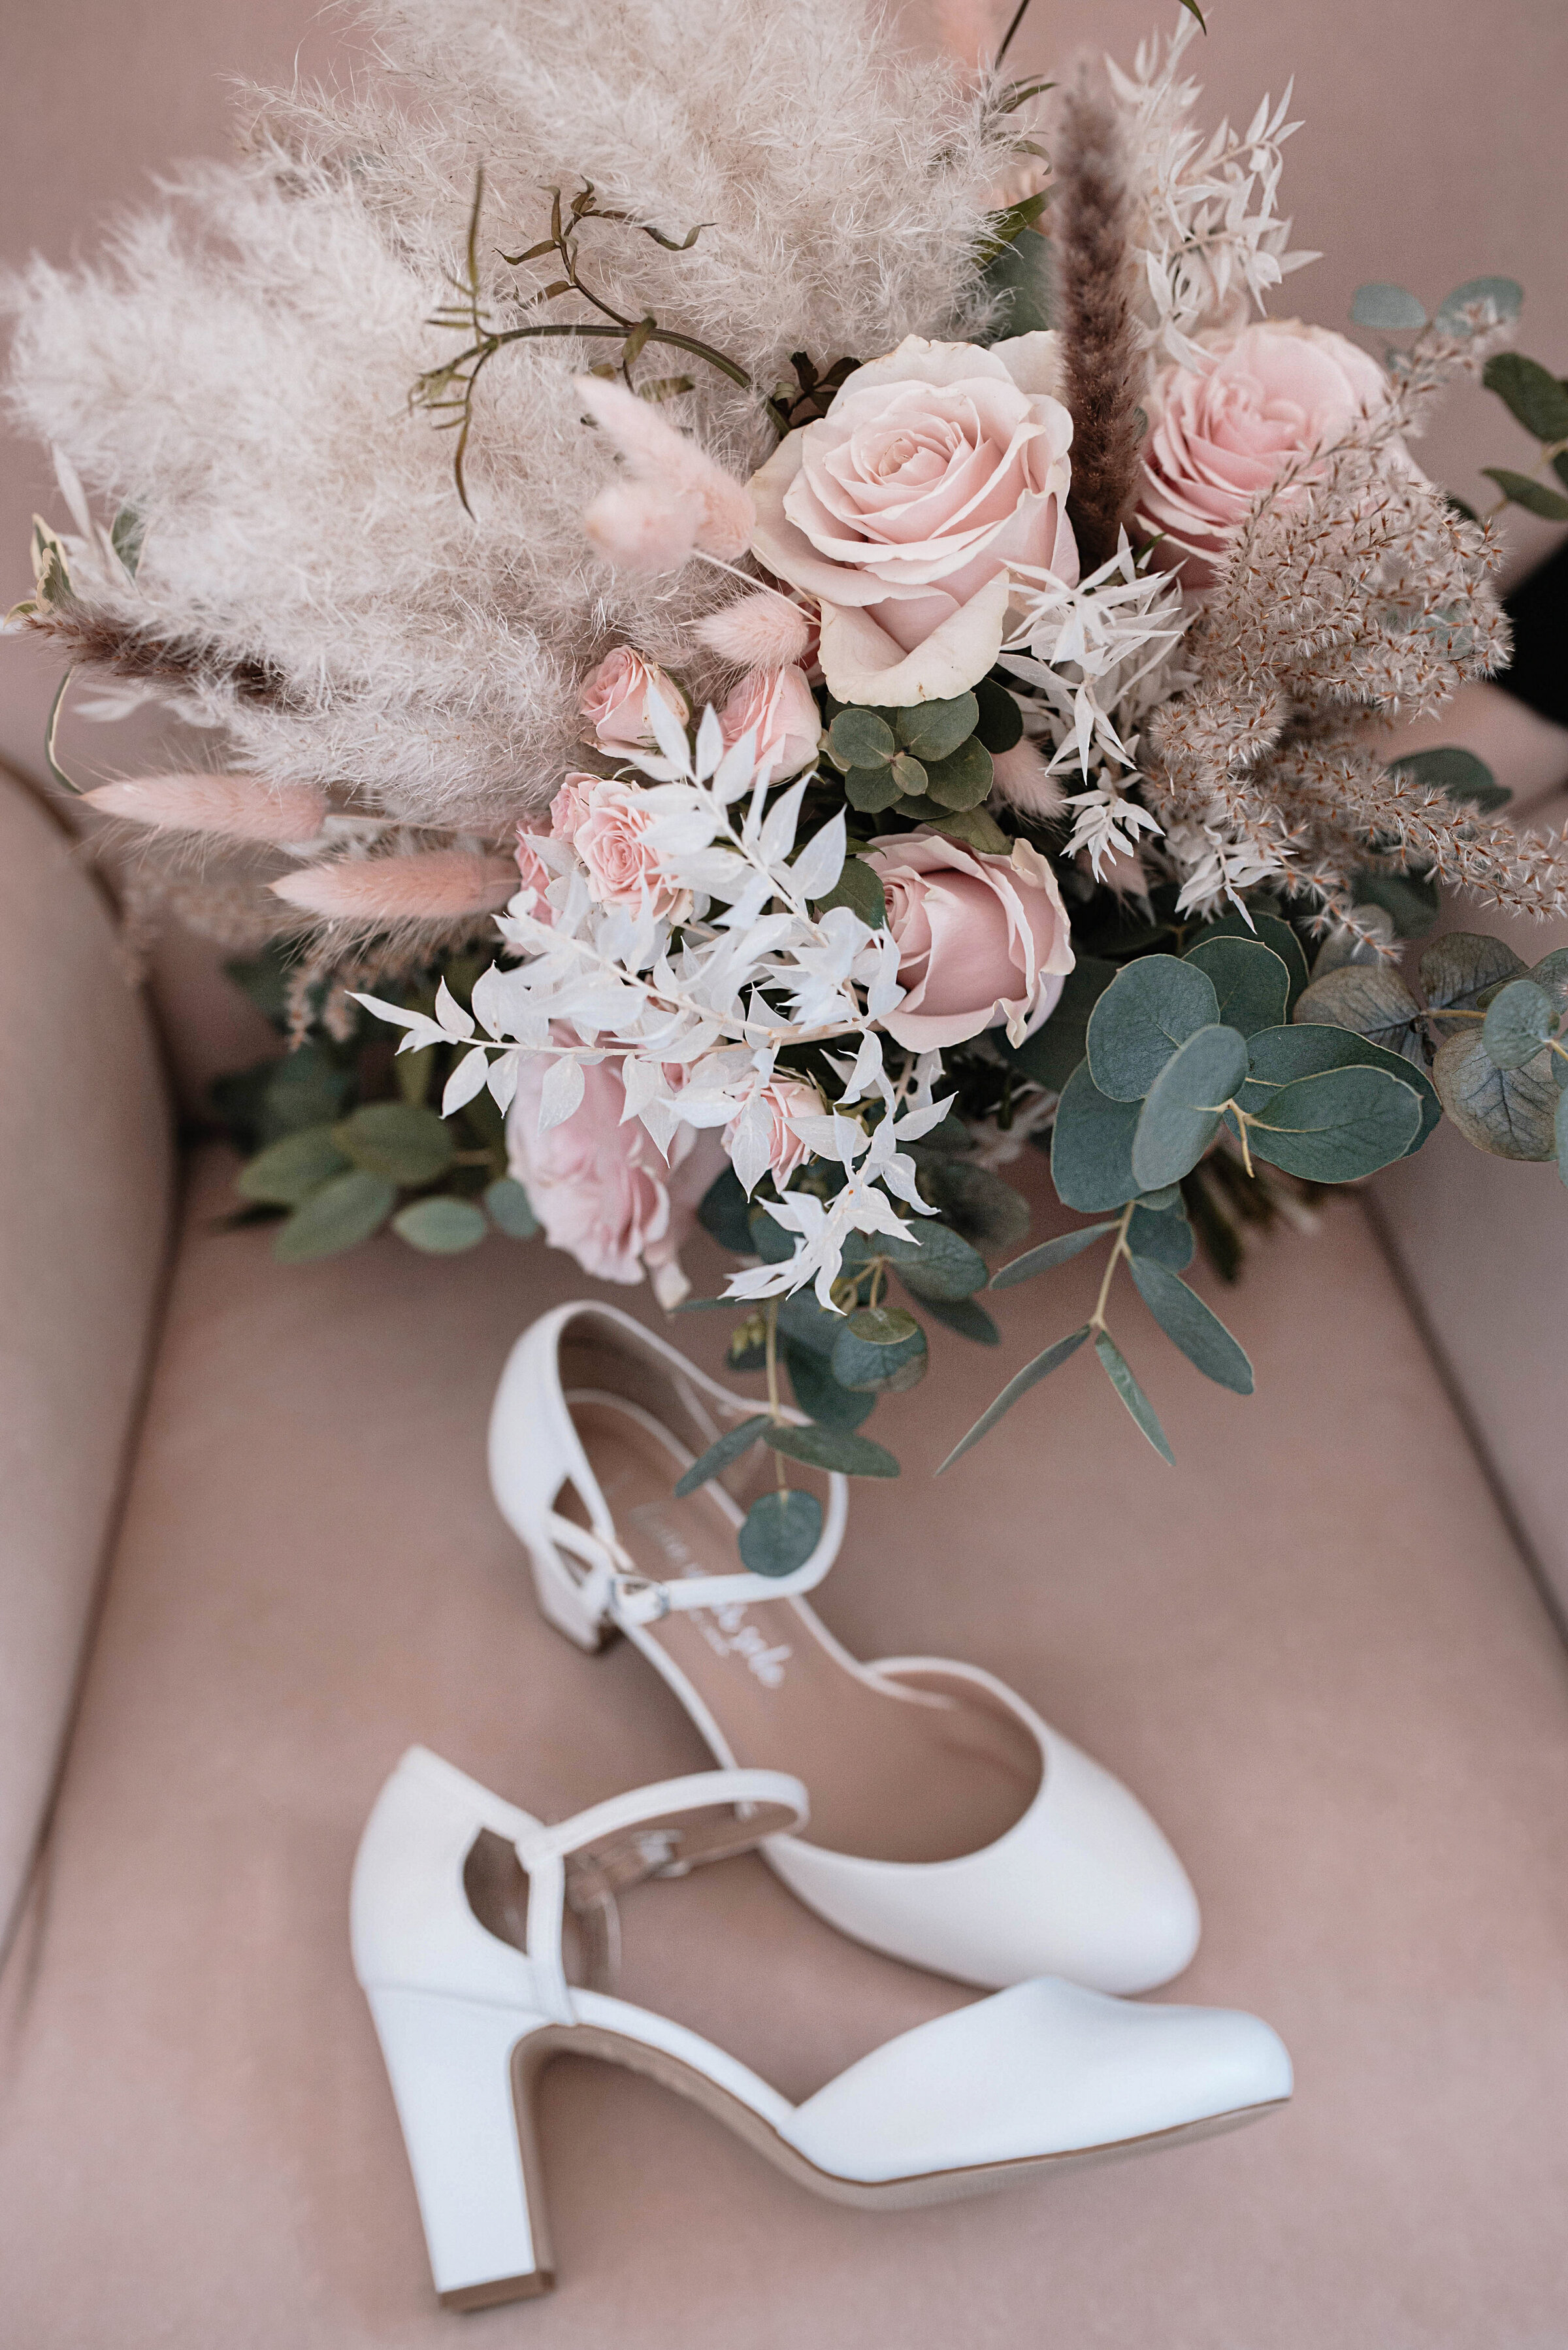 Bridal shoes seated on velvet pink chair with bridal bouquet of roses, bunny tails and eucalyptus